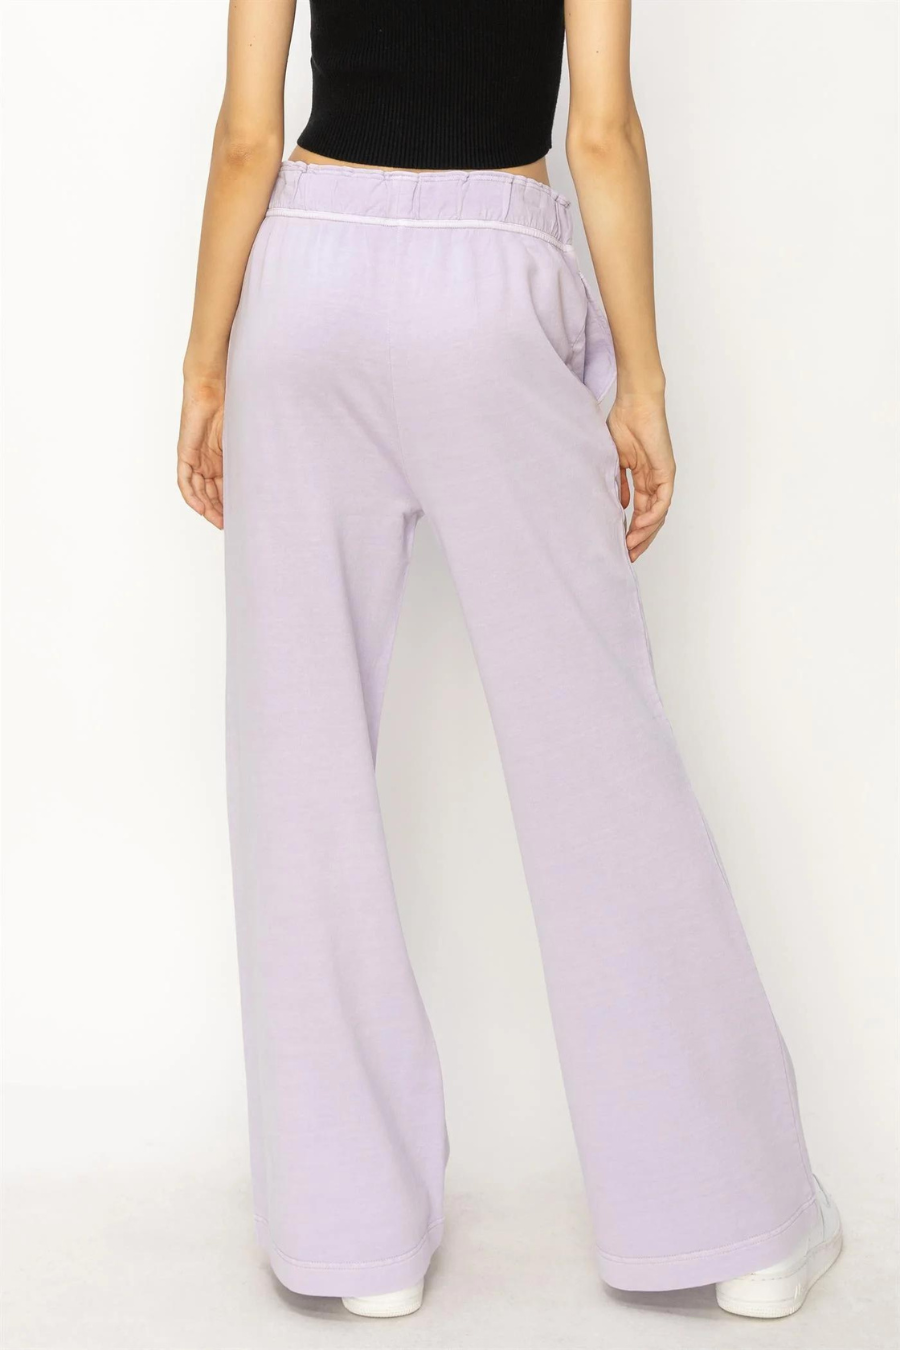 back close up view of Presley high waist flare pants 